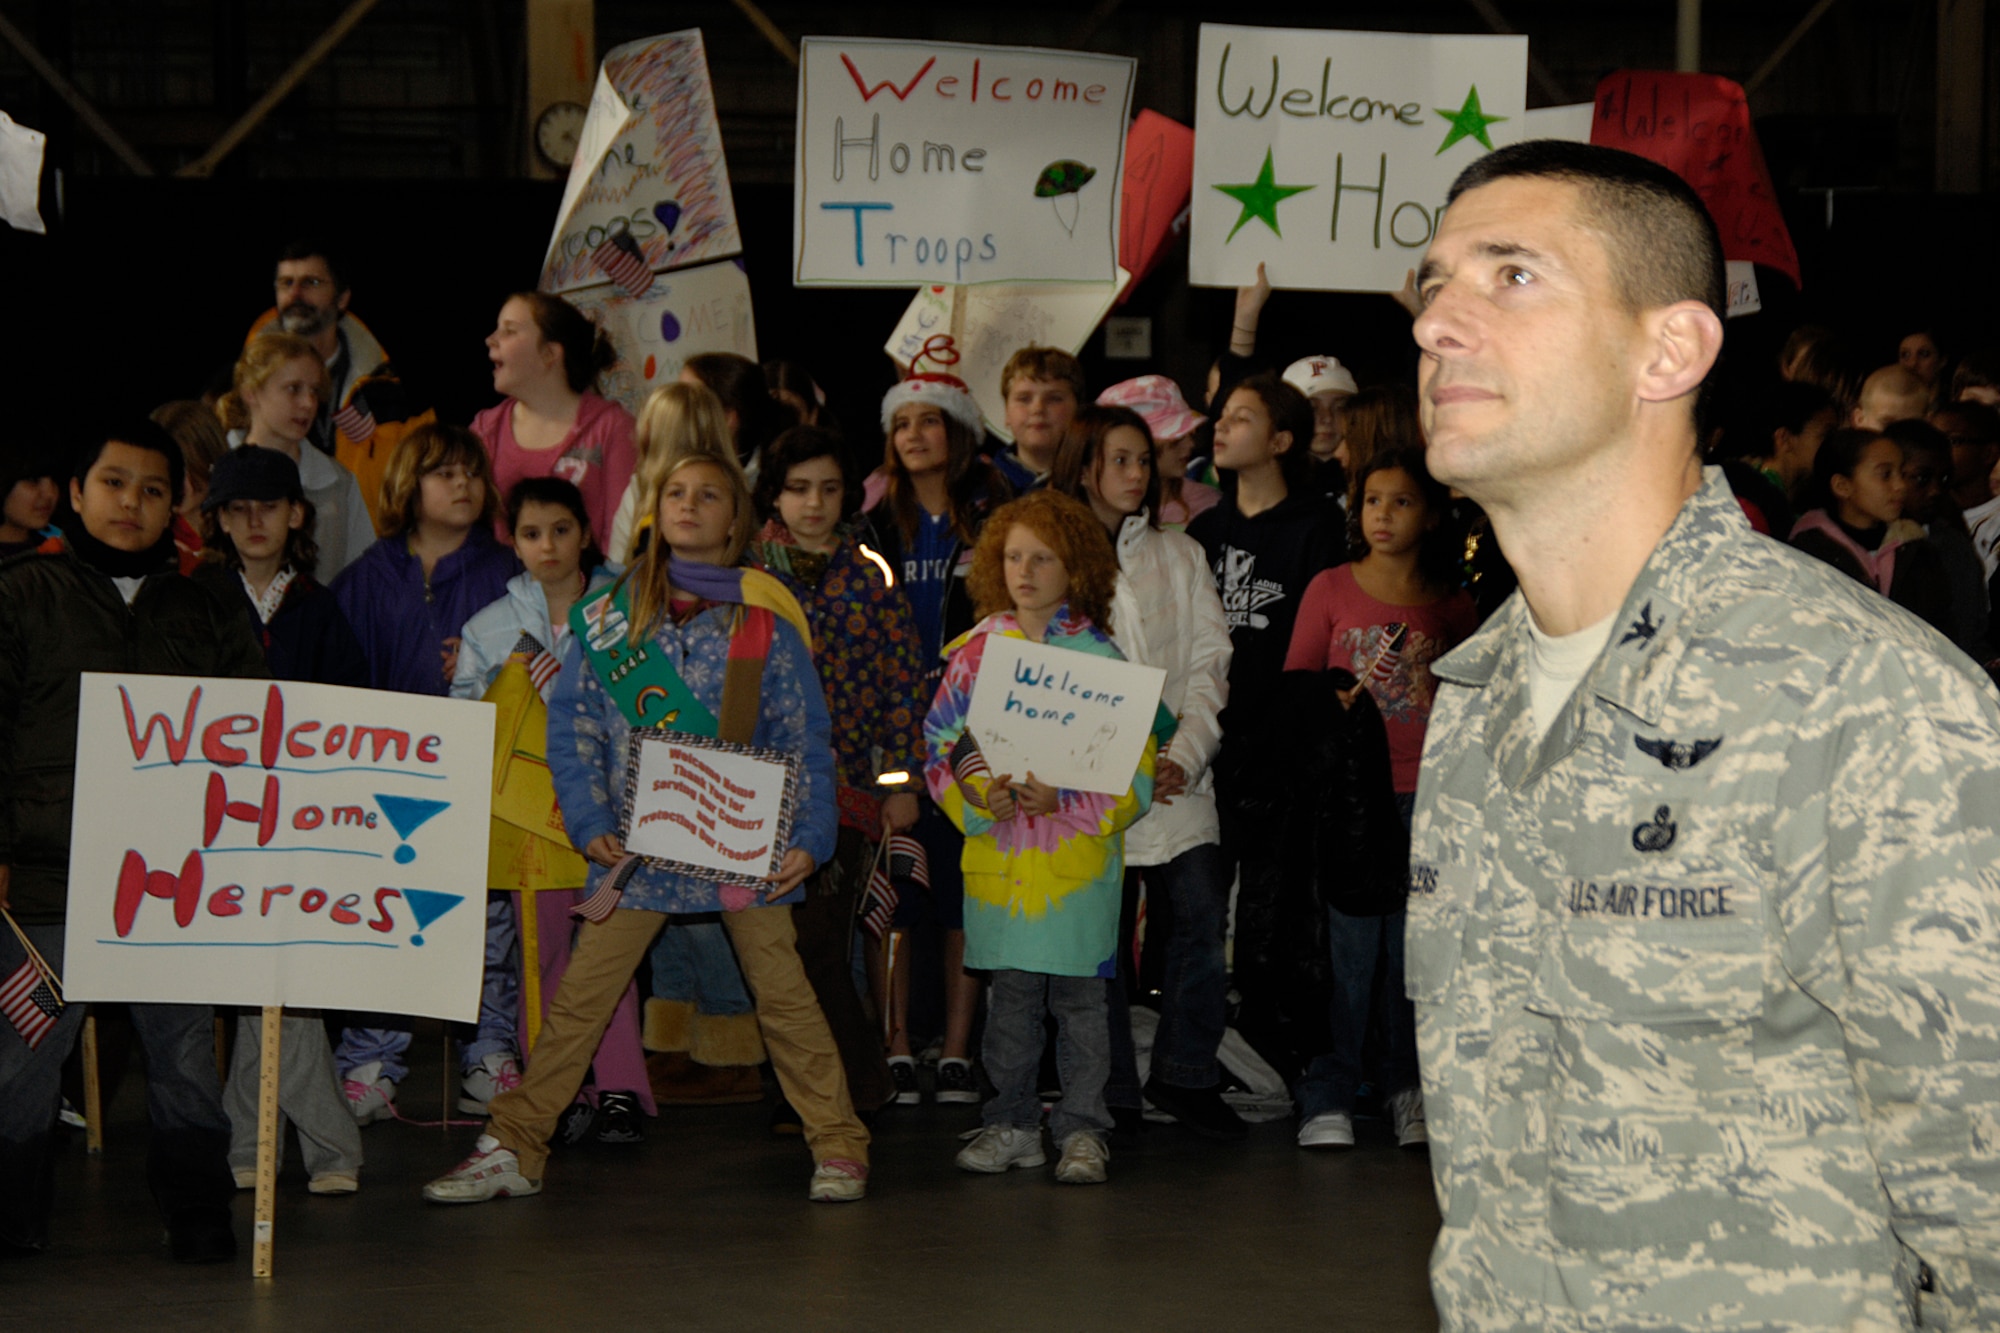 HANSCOM AIR FORCE BASE, Mass. – Col. Russell Fellers stands in formation while students from the Hanscom Middle School hold signs to welcome the Colonel and more than 45 Airmen home from deployments during the Heroes’ Homecoming celebration that took place Dec. 12 in the Aero Club hangar. The celebration included special appearances by Tom Hamilton of Aerosmith and Steve Grogan, former New England Patriots quarterback. (U.S. Air Force Photo by Linda LaBonte Britt)